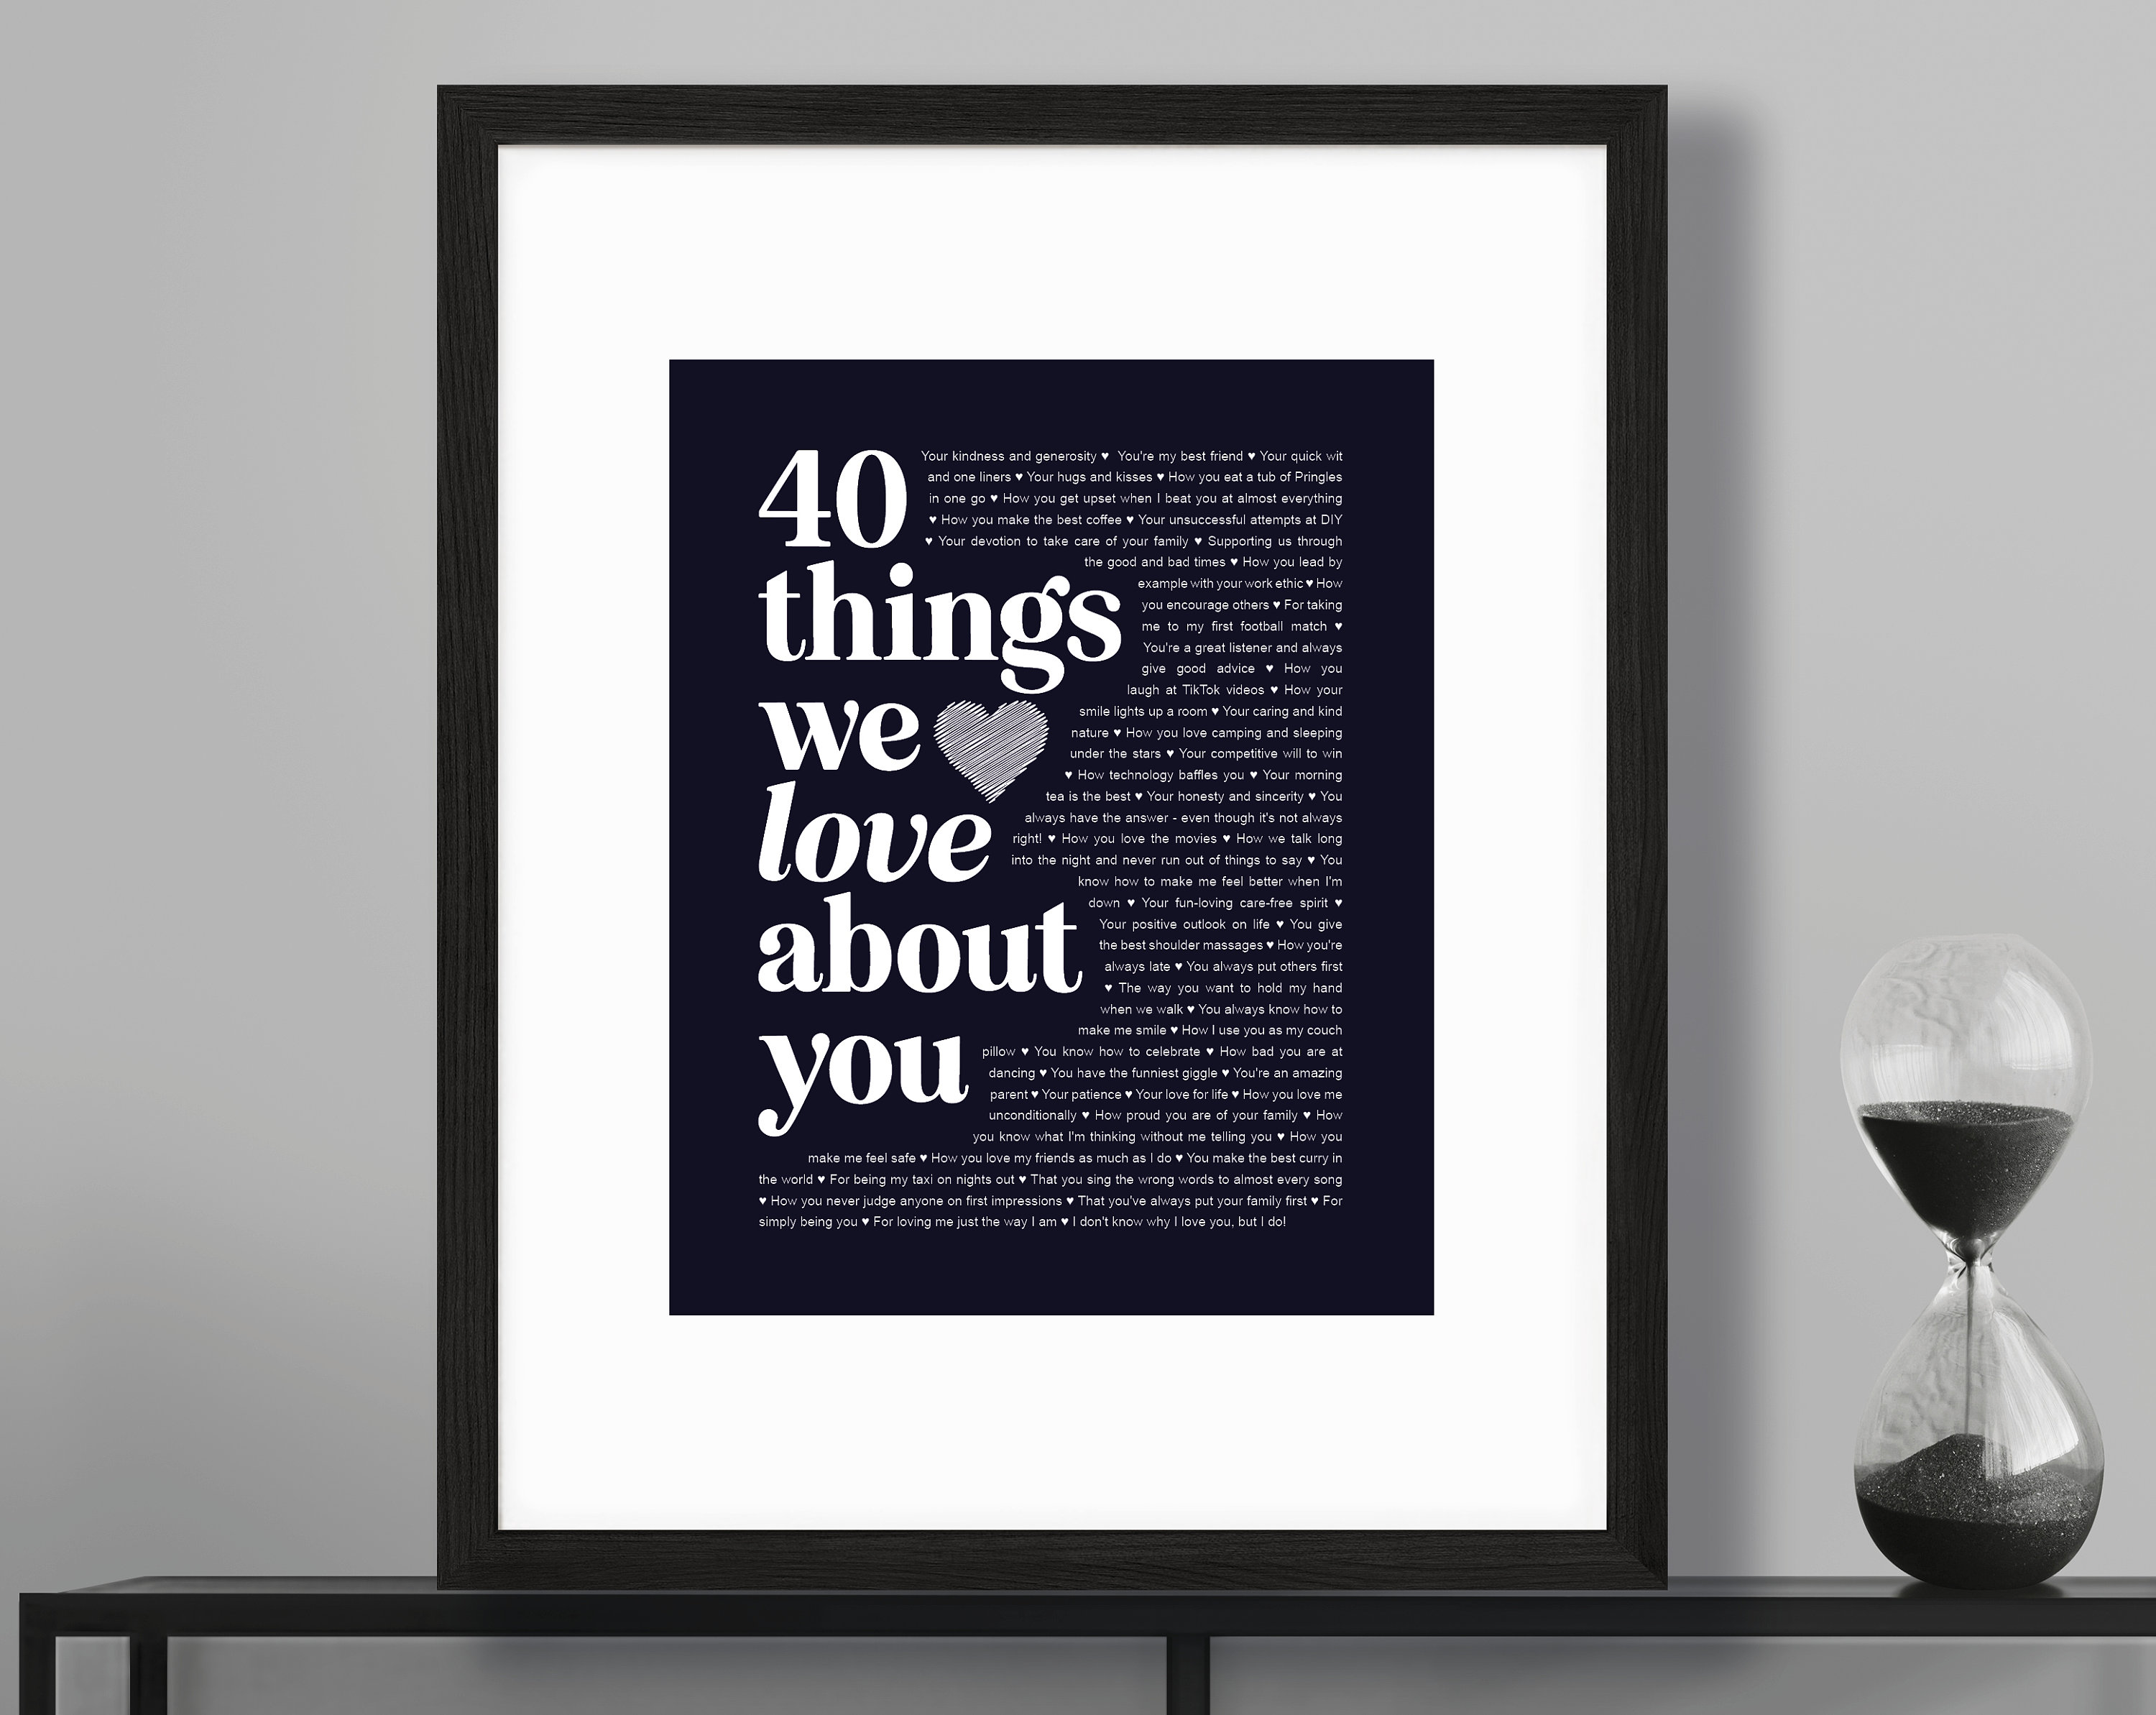 10 Things I Hate About You Poster, Movie Poster, Heath Ledger, American  Movie, 1990s Minimalist Movie Poster, Unique Art Print, Shakespeare 